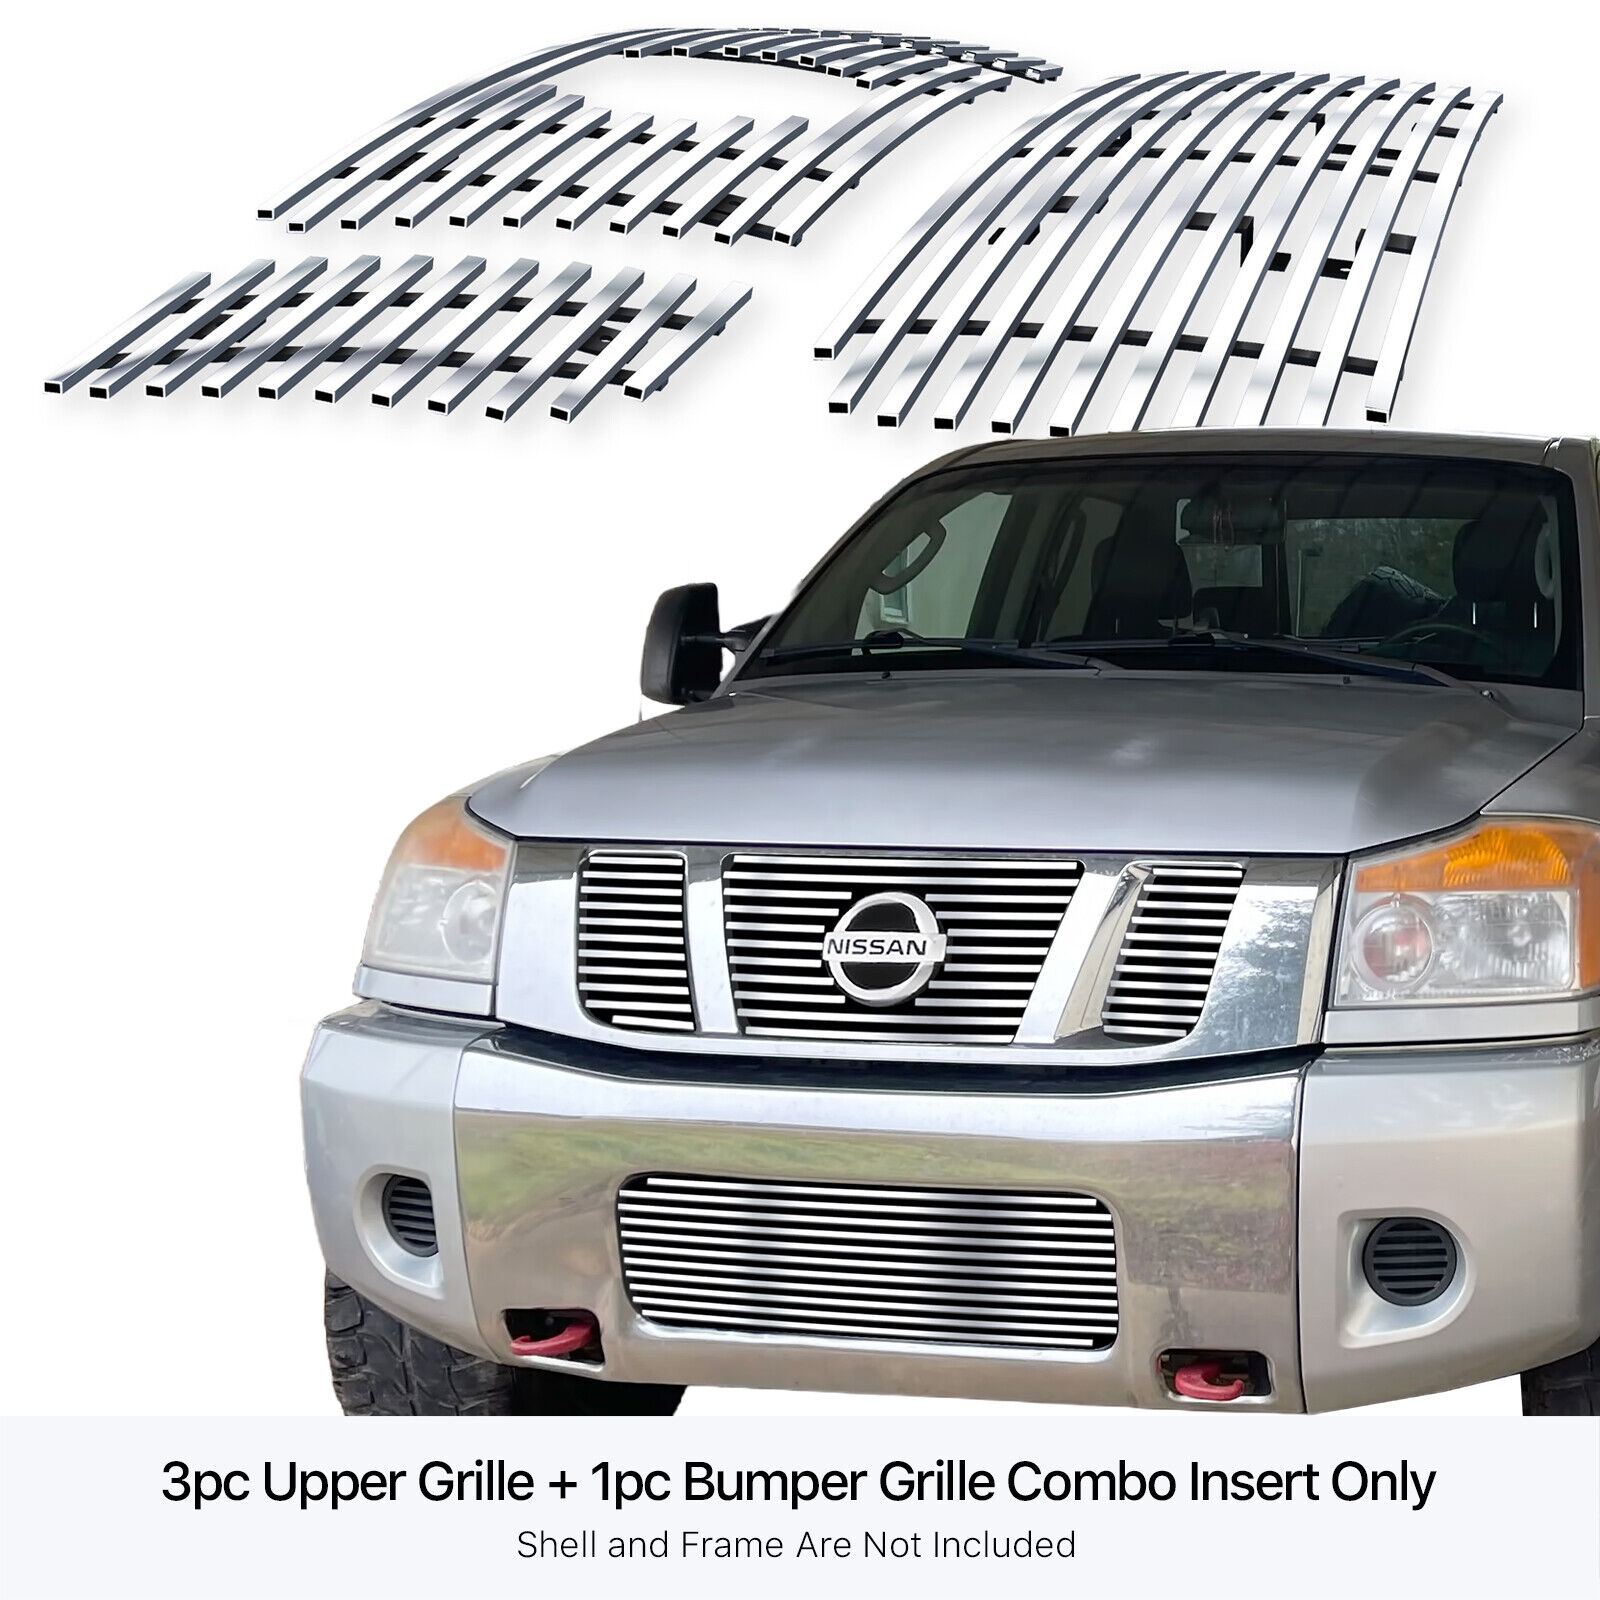 Fits 2008-2015 Nissan Titan Stainless Chrome Billet Grille Insert Combo